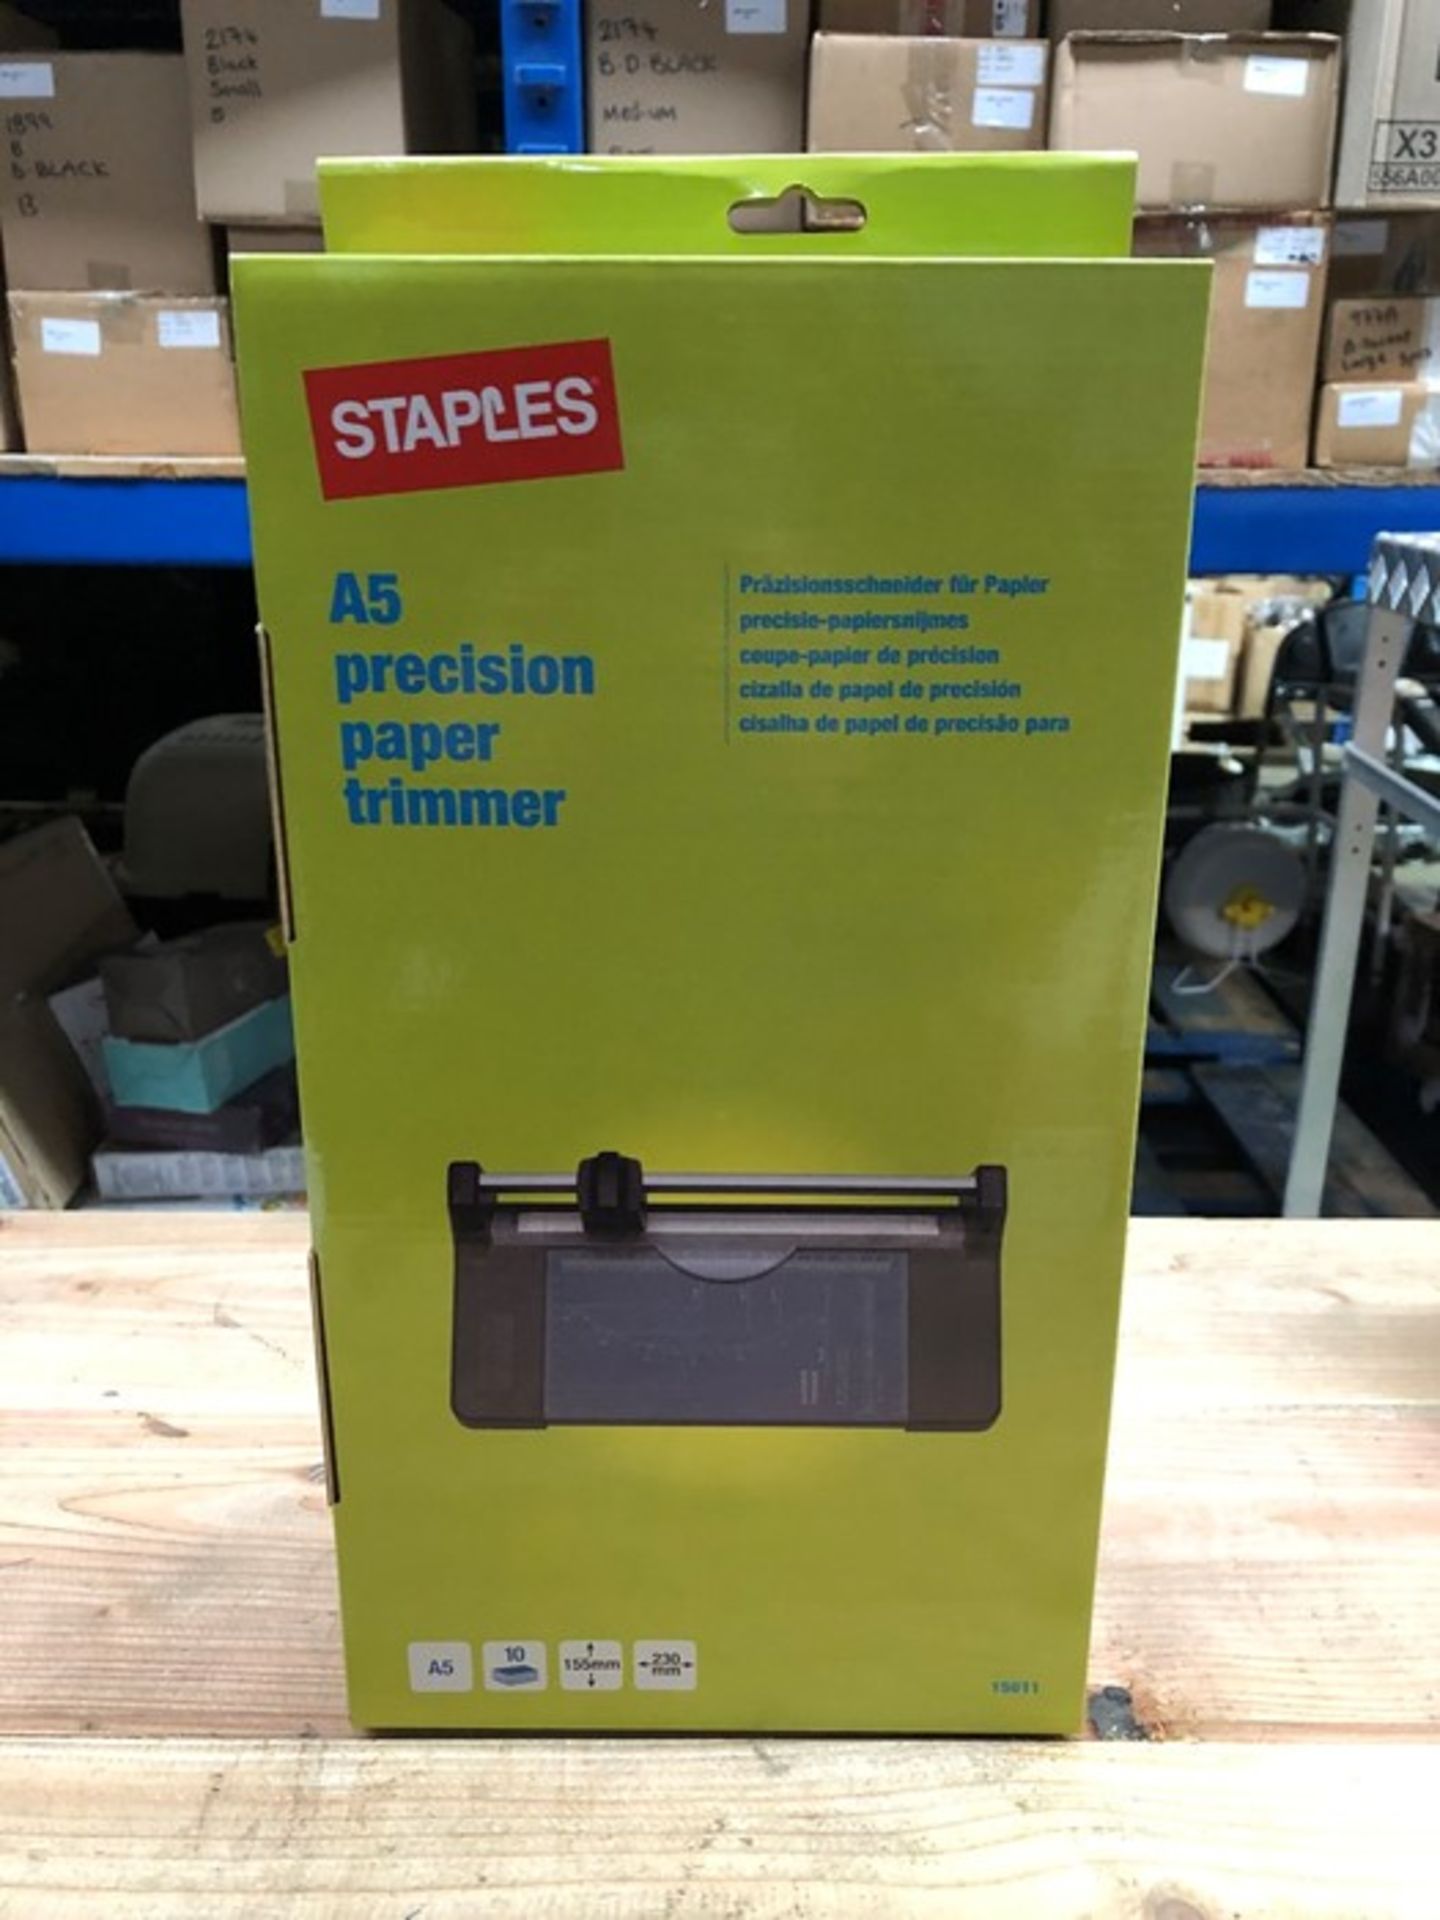 1 BOXED A5 PRECISION PAPER TRIMMER (PUBLIC VIEWING AVAILABLE)